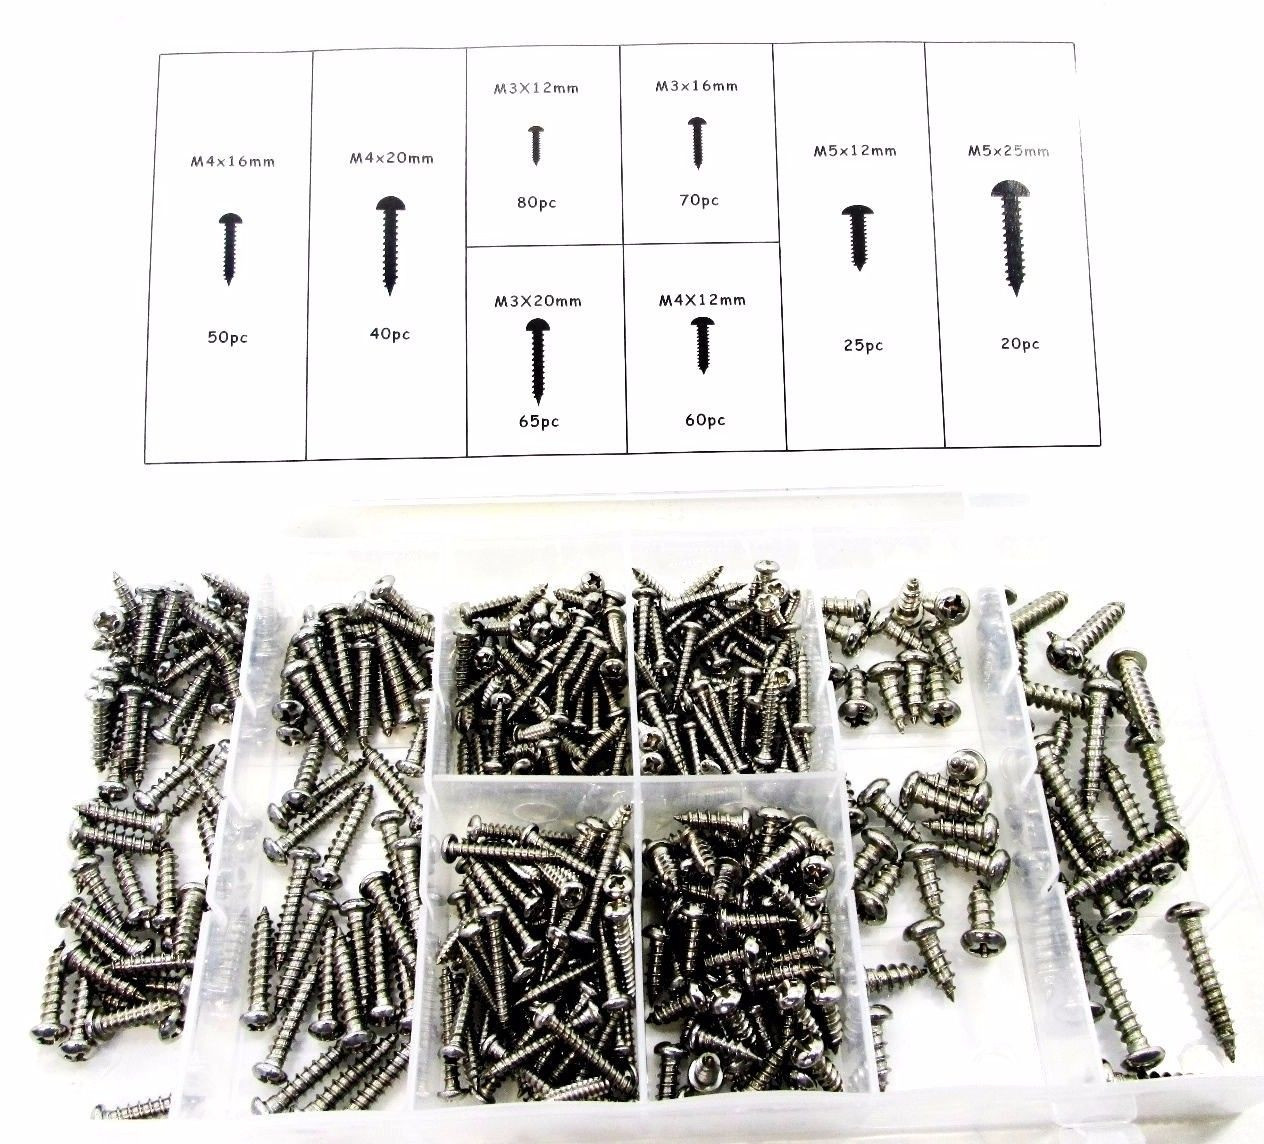 Self Tapping Screw Assortment 410pc Stainless Steel Metal Screws M3 to M5 HW012 